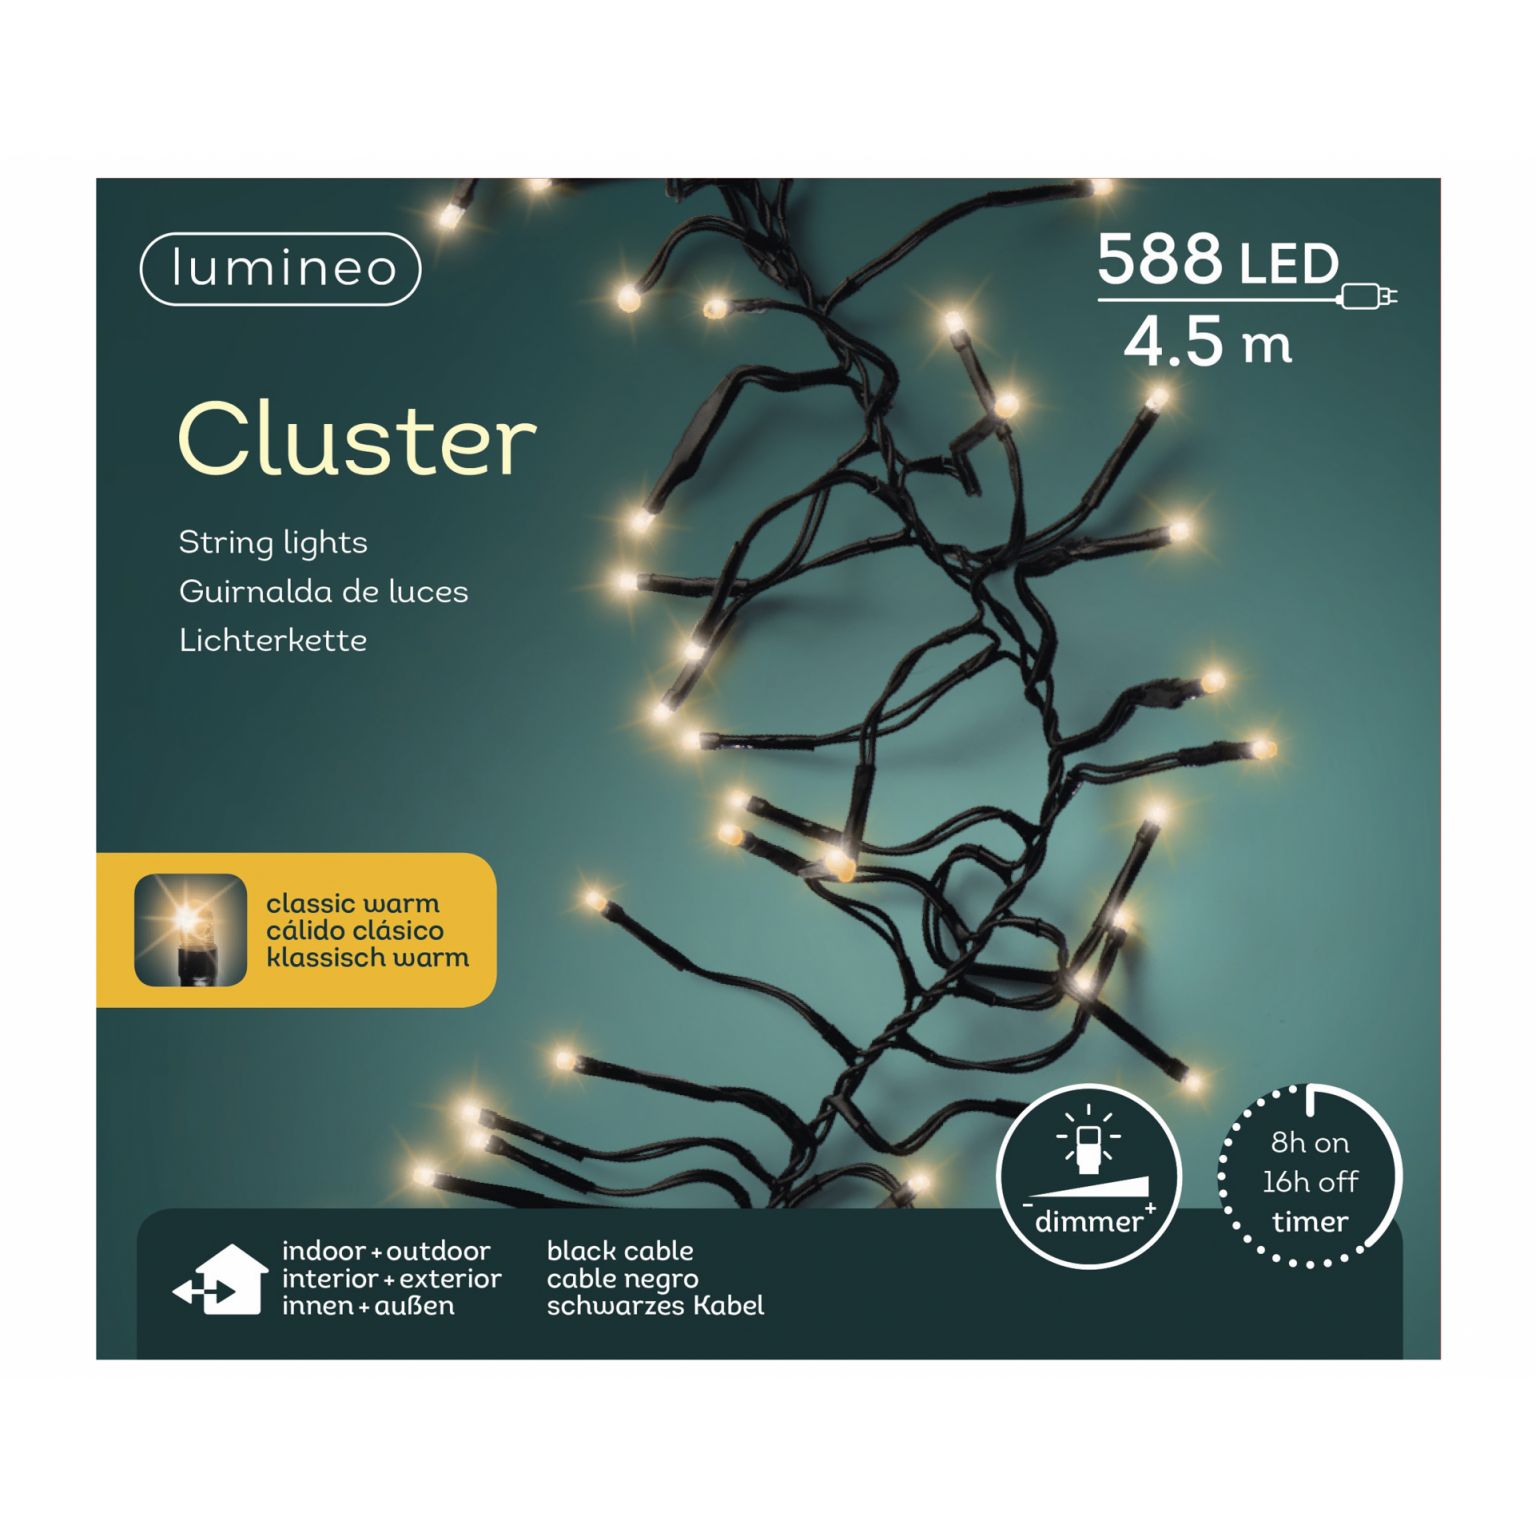 Clusterverlichting lumineo 588-lamps LED 'classic warm